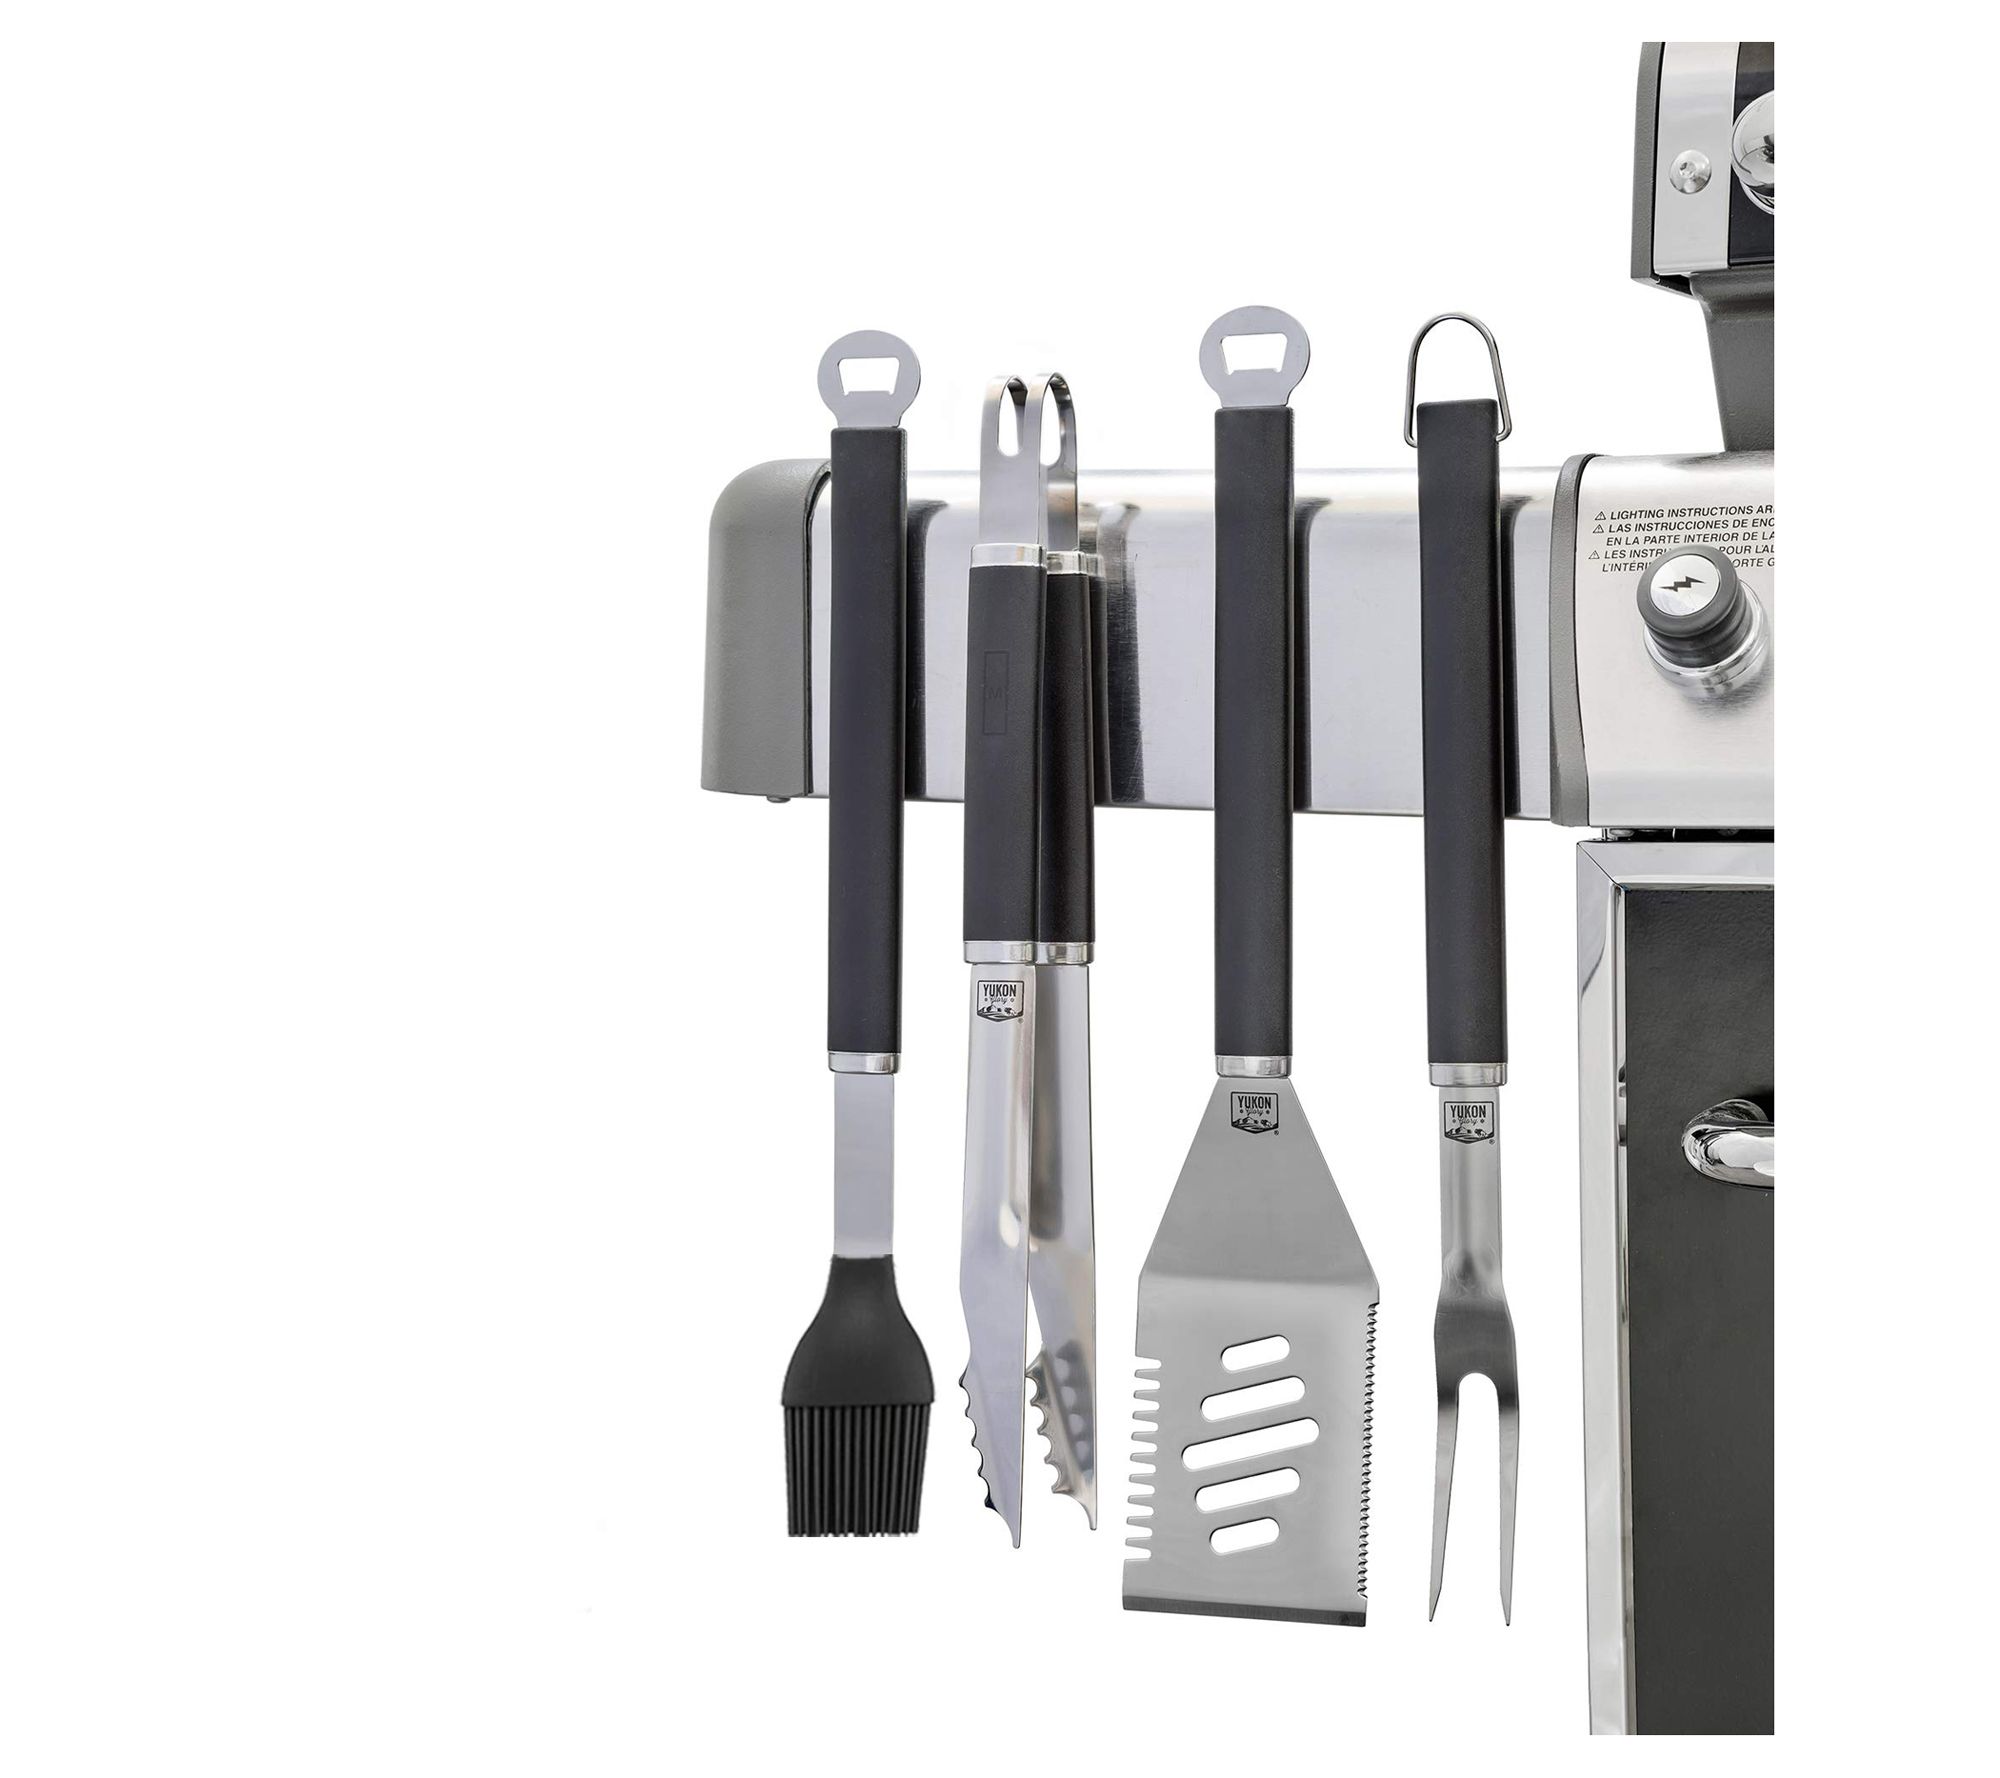 Pure Grill 4-Piece Stainless Steel BBQ Tool Utensil Set with Meat Fork,  Spatula, Tongs, and Basting Brush